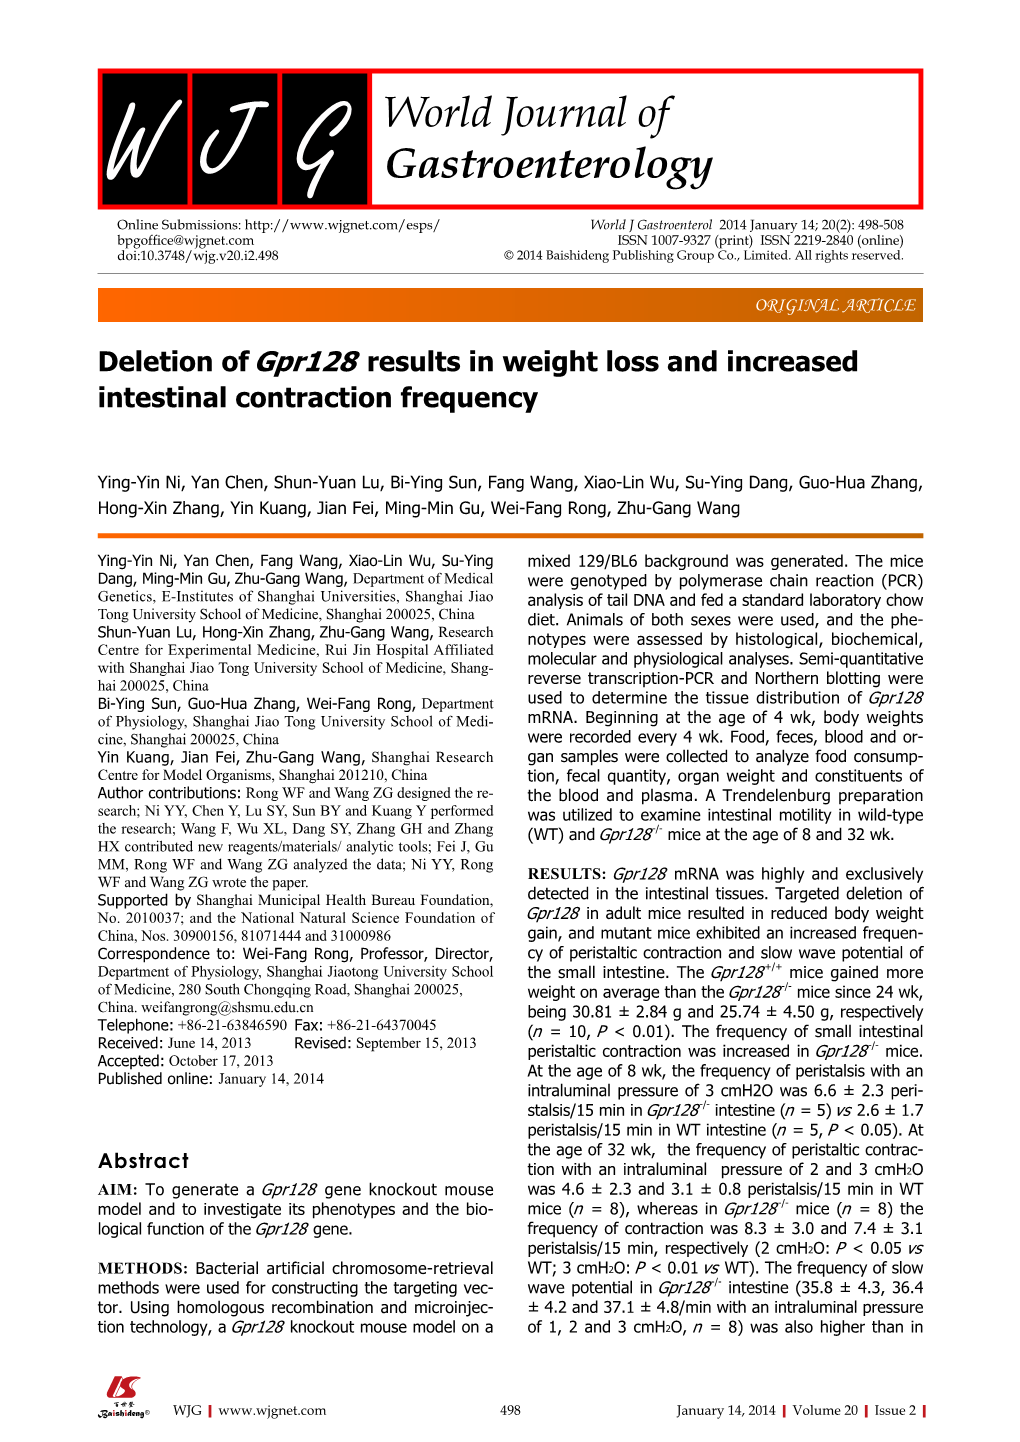 Deletion of Gpr128 Results in Weight Loss and Increased Intestinal Contraction Frequency